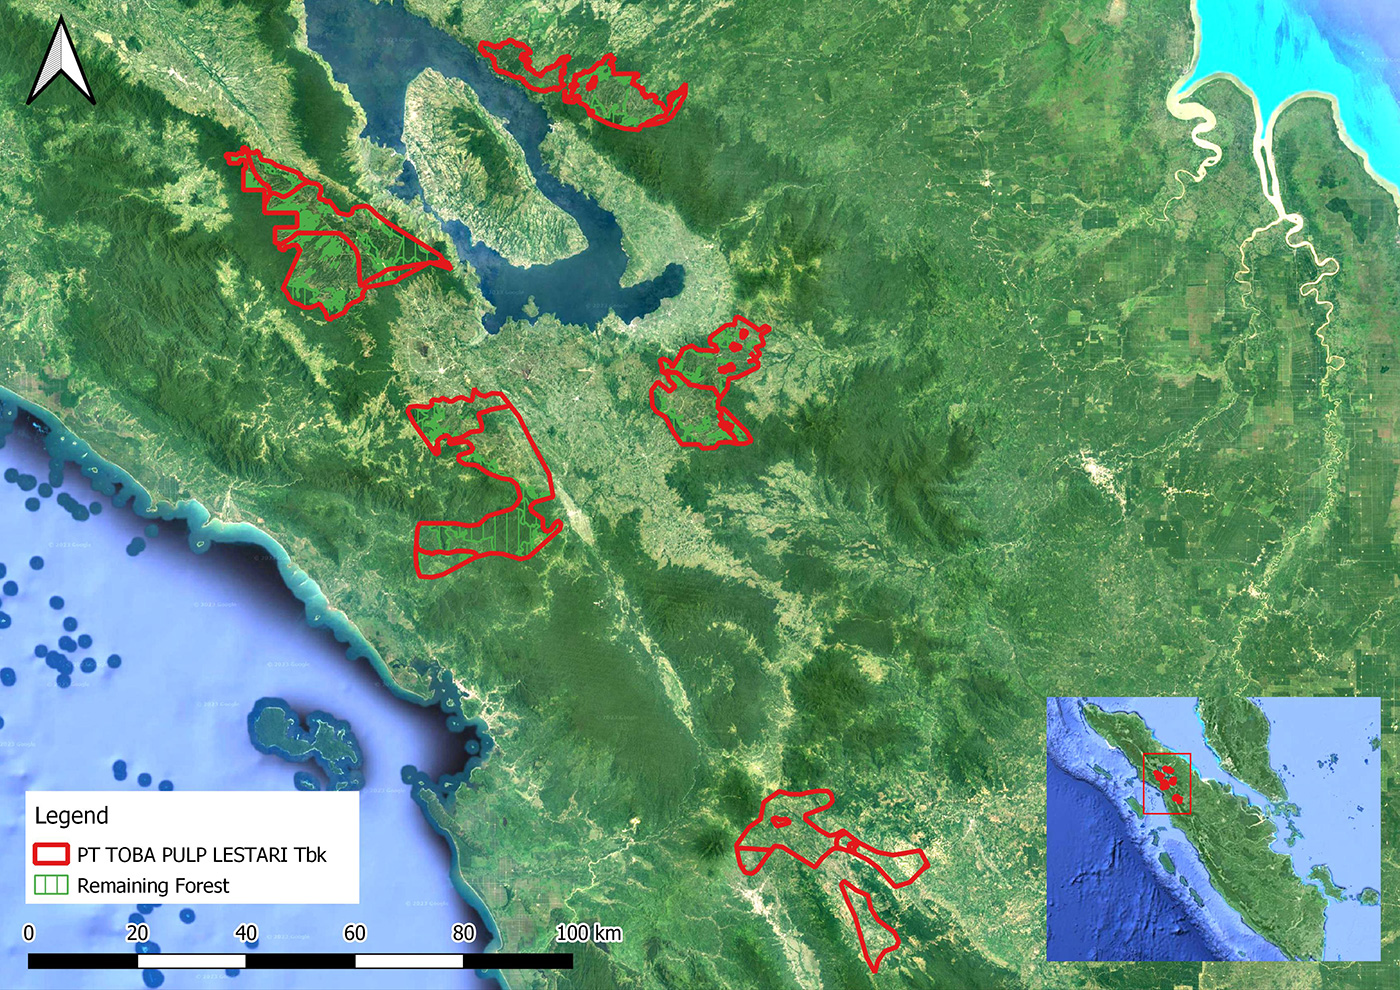 Map of remaining forests inside PT. Toba Pulp Lestari concessions. 